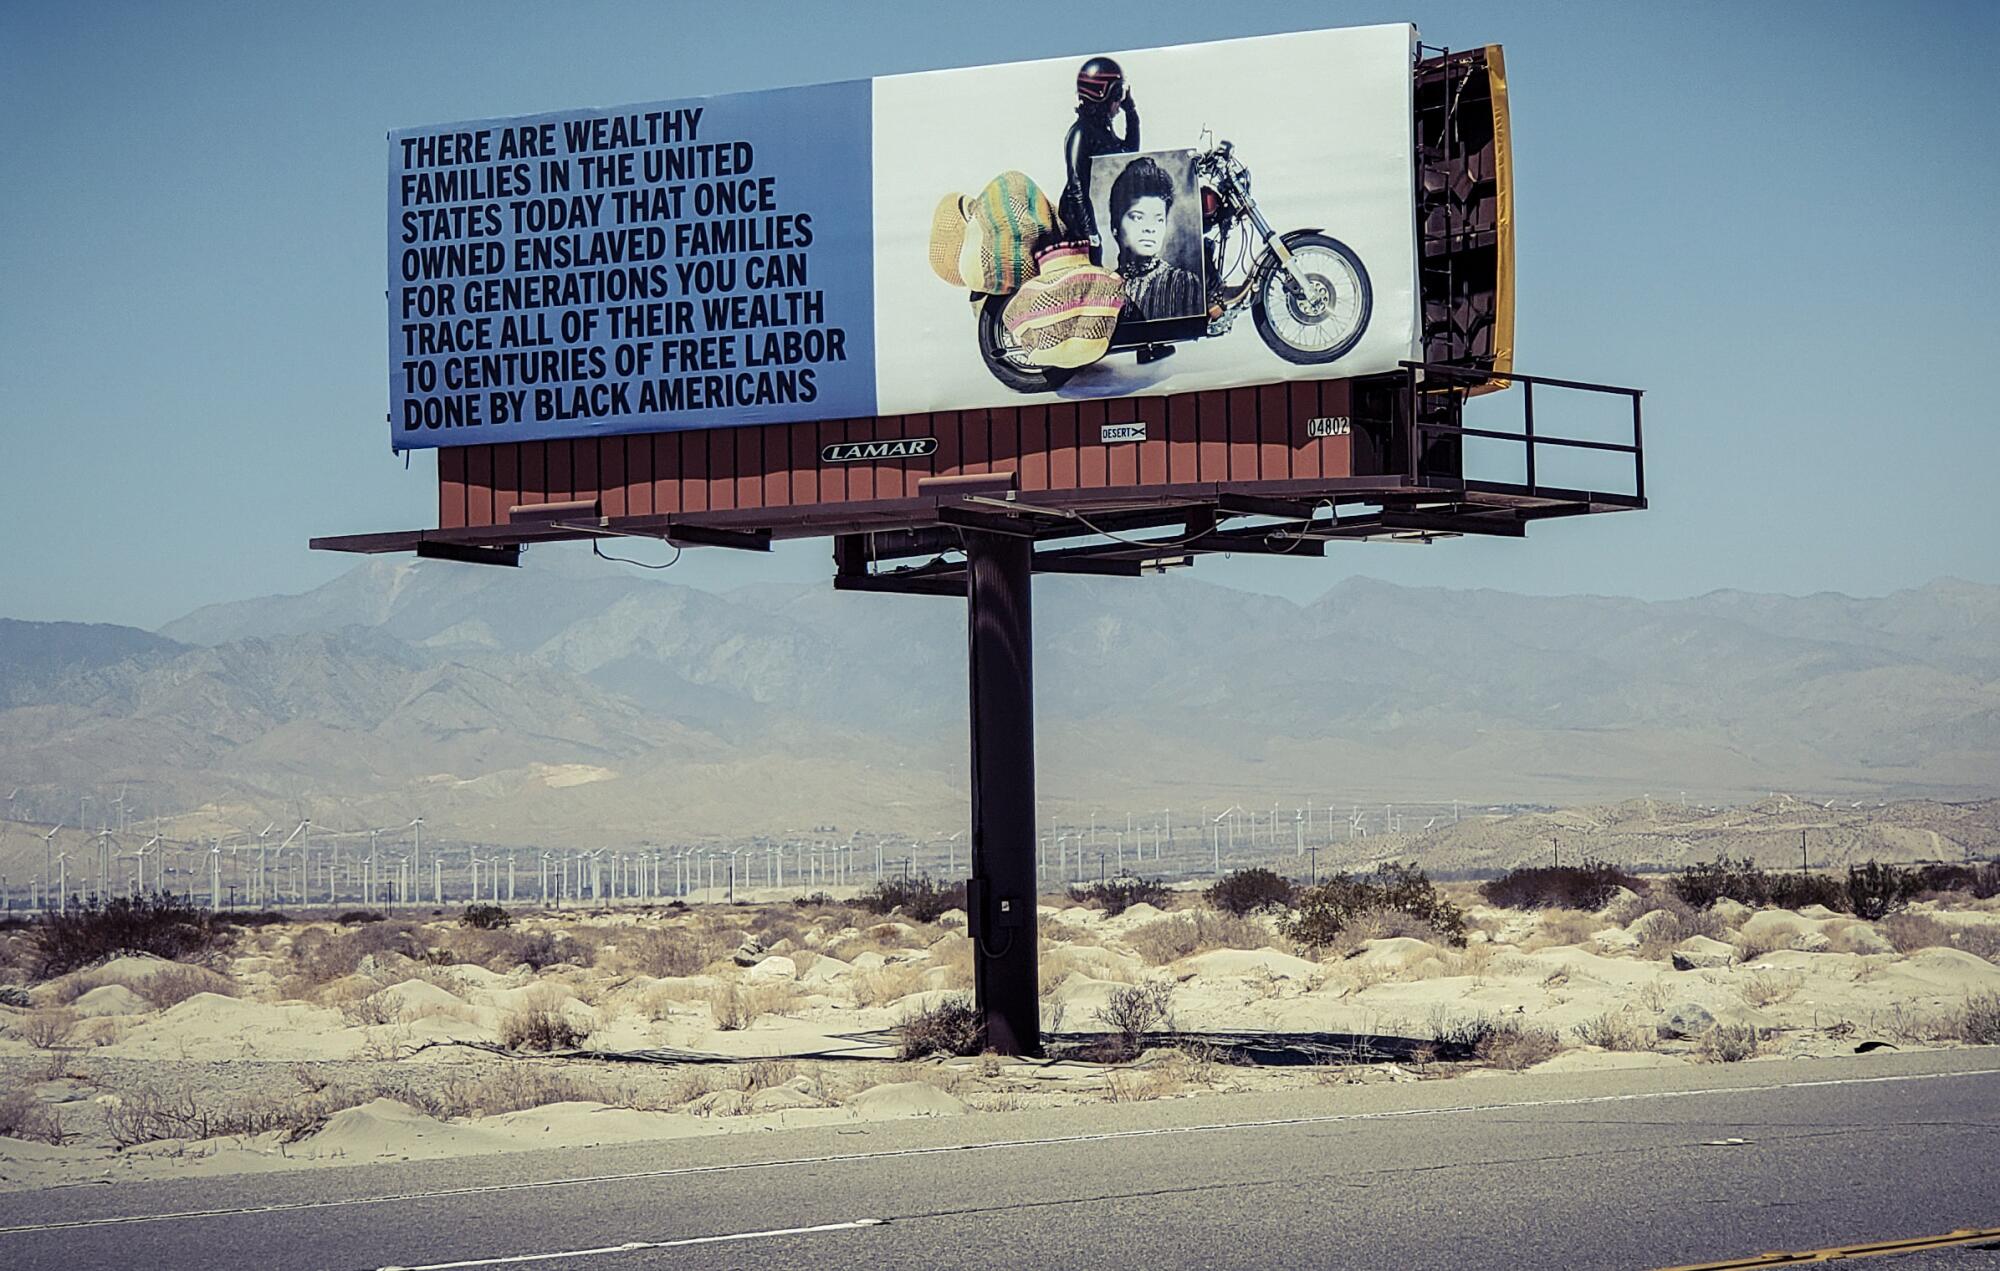 A billboard of a motorcycle and old photo links some of today's wealth to "centuries of free labor done by Black Americans."